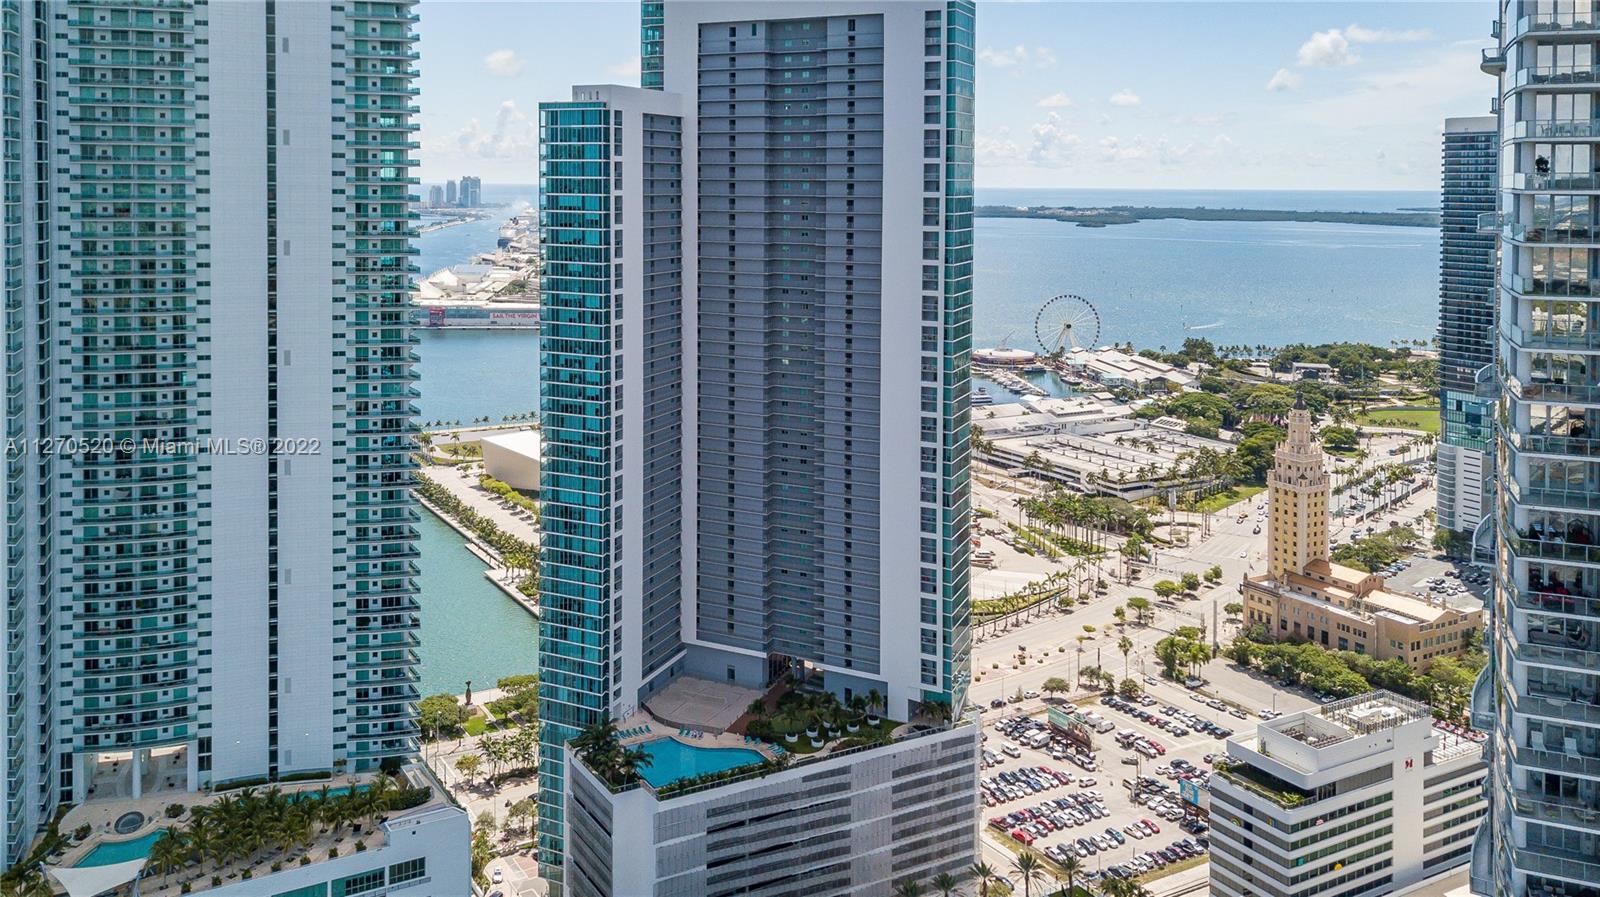 Spectacular apartment in Downtown/Brickell. 2 bedrooms and 2 bathrooms. Incredible Ocean Views Floor to ceiling windows provide stunning 180 degree panoramic ocean views to Miami Dade and Biscayne Bay, Miami Beach, Key Biscayne, it's truly amazing. Architectural luxury building with sunrise and sunset pools, 2 Jacuzzis, 24-hour security, concierge, valet service, business center, outdoor lounge and BBQ, state-of-the-art fitness center, beach volleyball, yoga room, club room and putting green Located in the heart of Downtown Miami with Brightline, World Center Miami, just steps from Heat Arena, Perez Art Museum, Science Museum and shopping. Close to South Beach and Brickell too! Incredible apartment to enjoy in the heart of Miami... Don't wait any longer and request your visit.